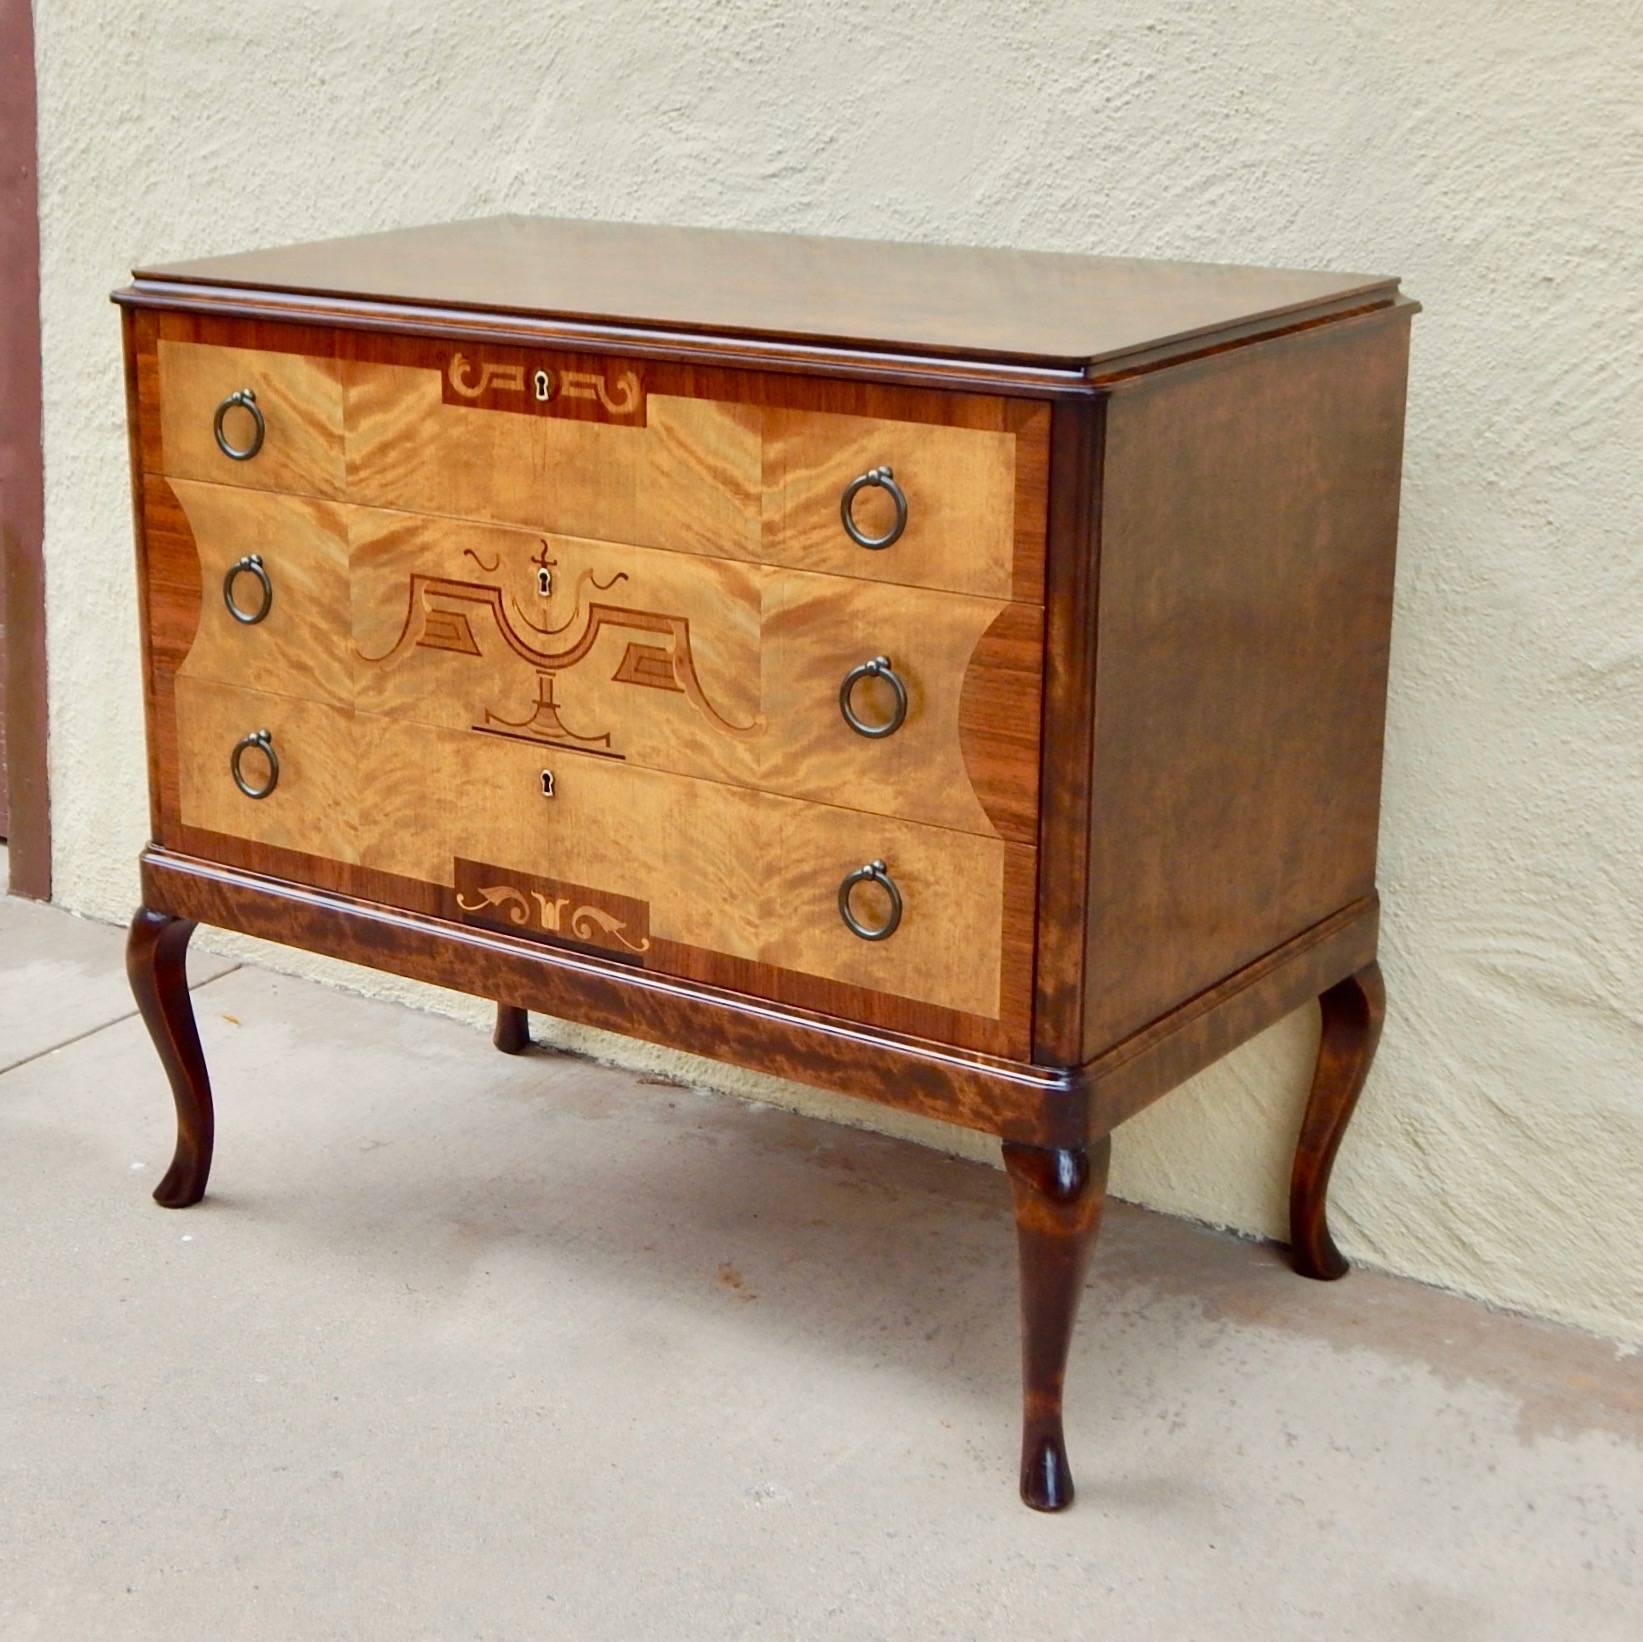 Swedish art deco chest of drawers with neo-classical inlaid frieze. Front rendered in highly figured golden flame birch wood. Inlay in rosewood, pear and ebony. 
All original pulls. This chest has just been beautifully restored by our craftsmen.